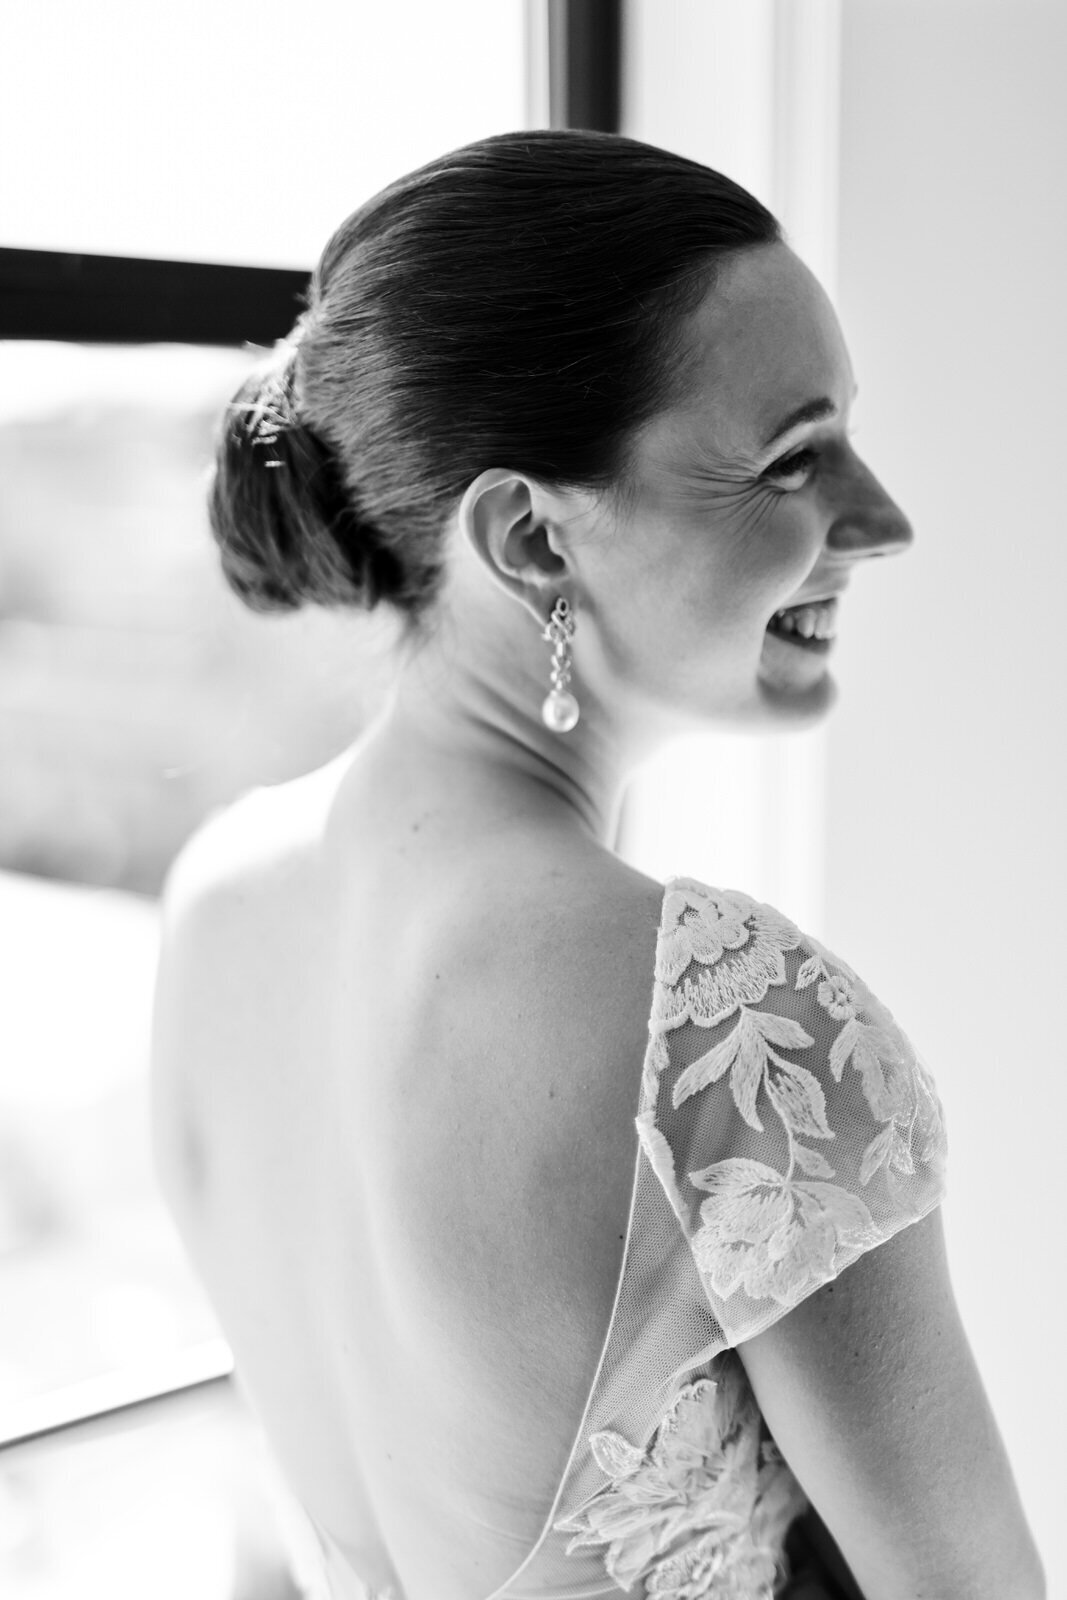 Classic getting ready wedding portraits at the modern DC wedding venue, the Line Hotel.